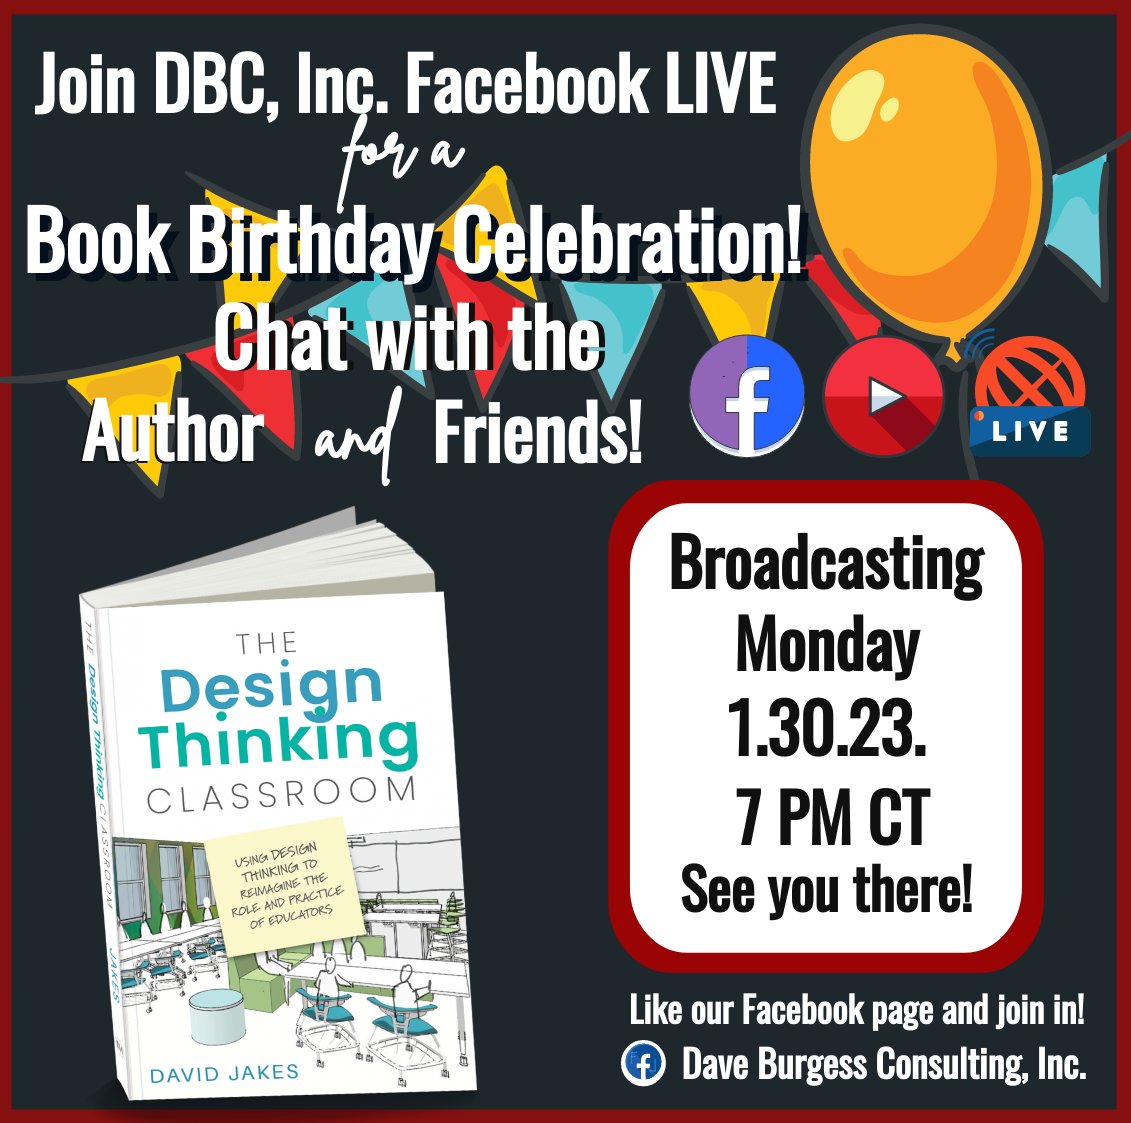 1 hour...
We have a Book Birthday for David Jakes + The Design Thinking Classroom!
Hope to see you there!🎉
1.30.23.
7 PM CT 
📹 facebook.com/dbcinc
#dbcincbooks #tlap @burgessdave @TaraMartinEDU @djakesdesigns @djakes #IMpress